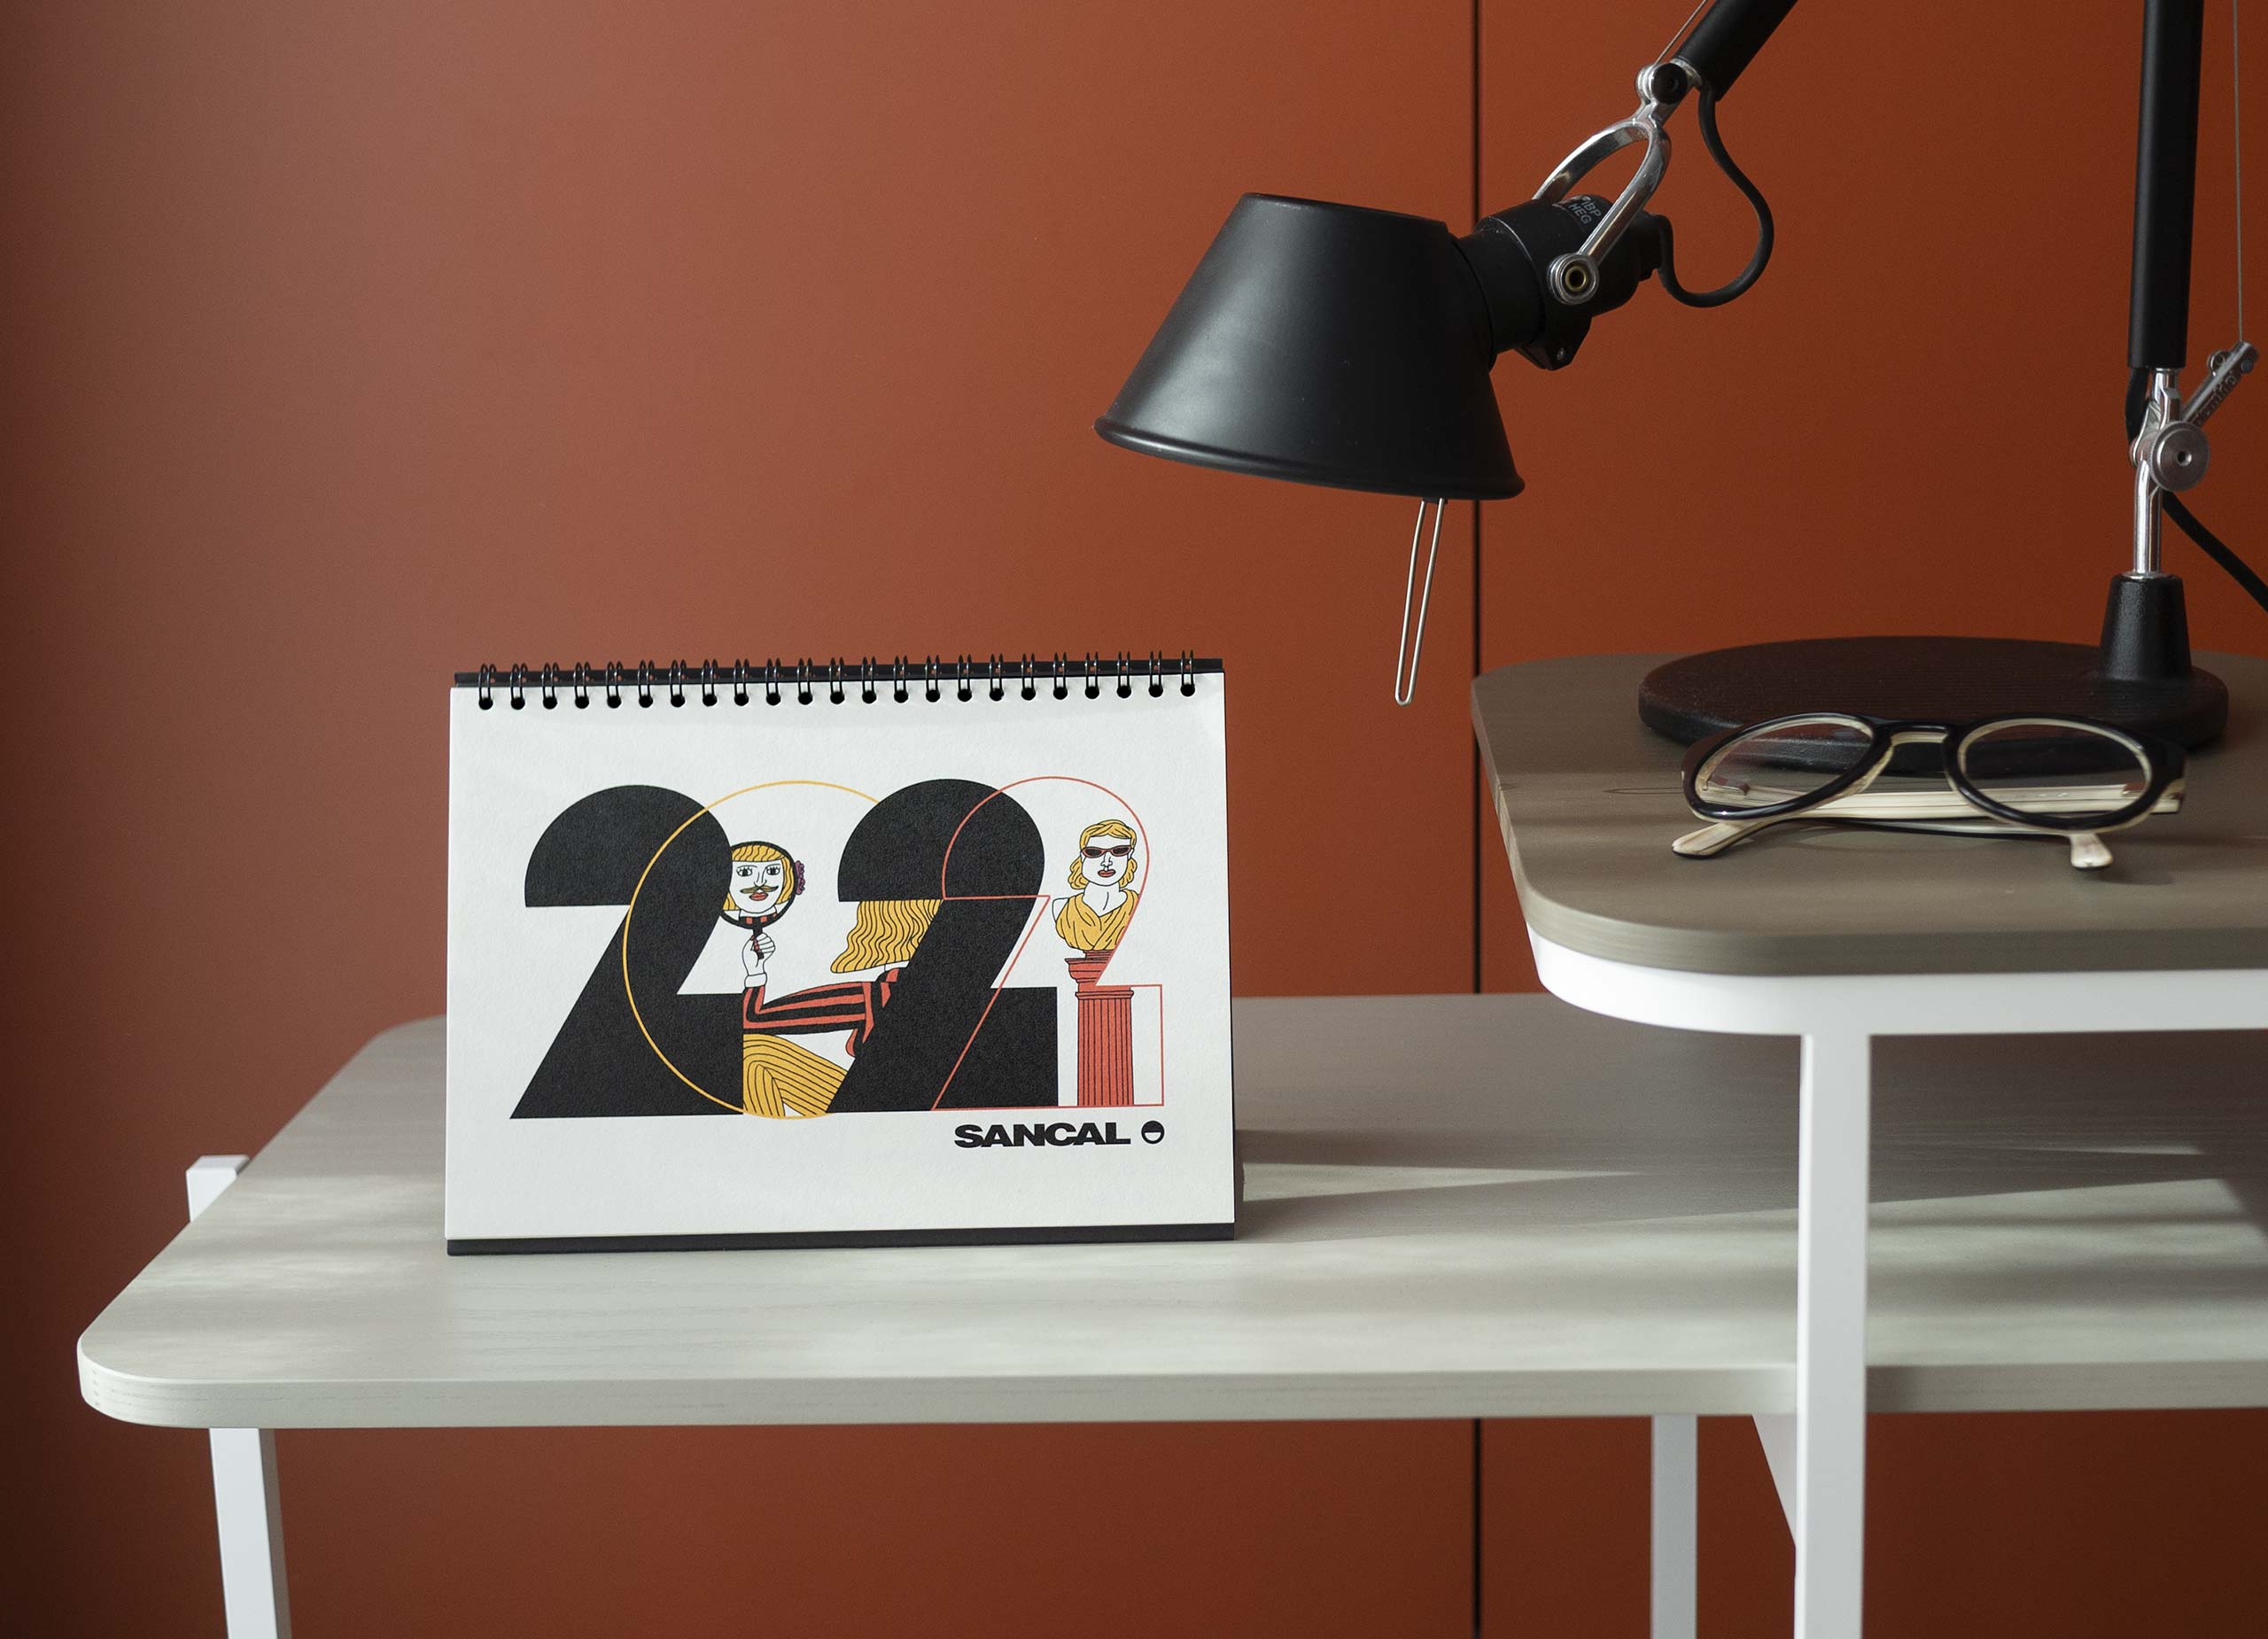 We welcome 2022 and also Sancal’s new calendar!